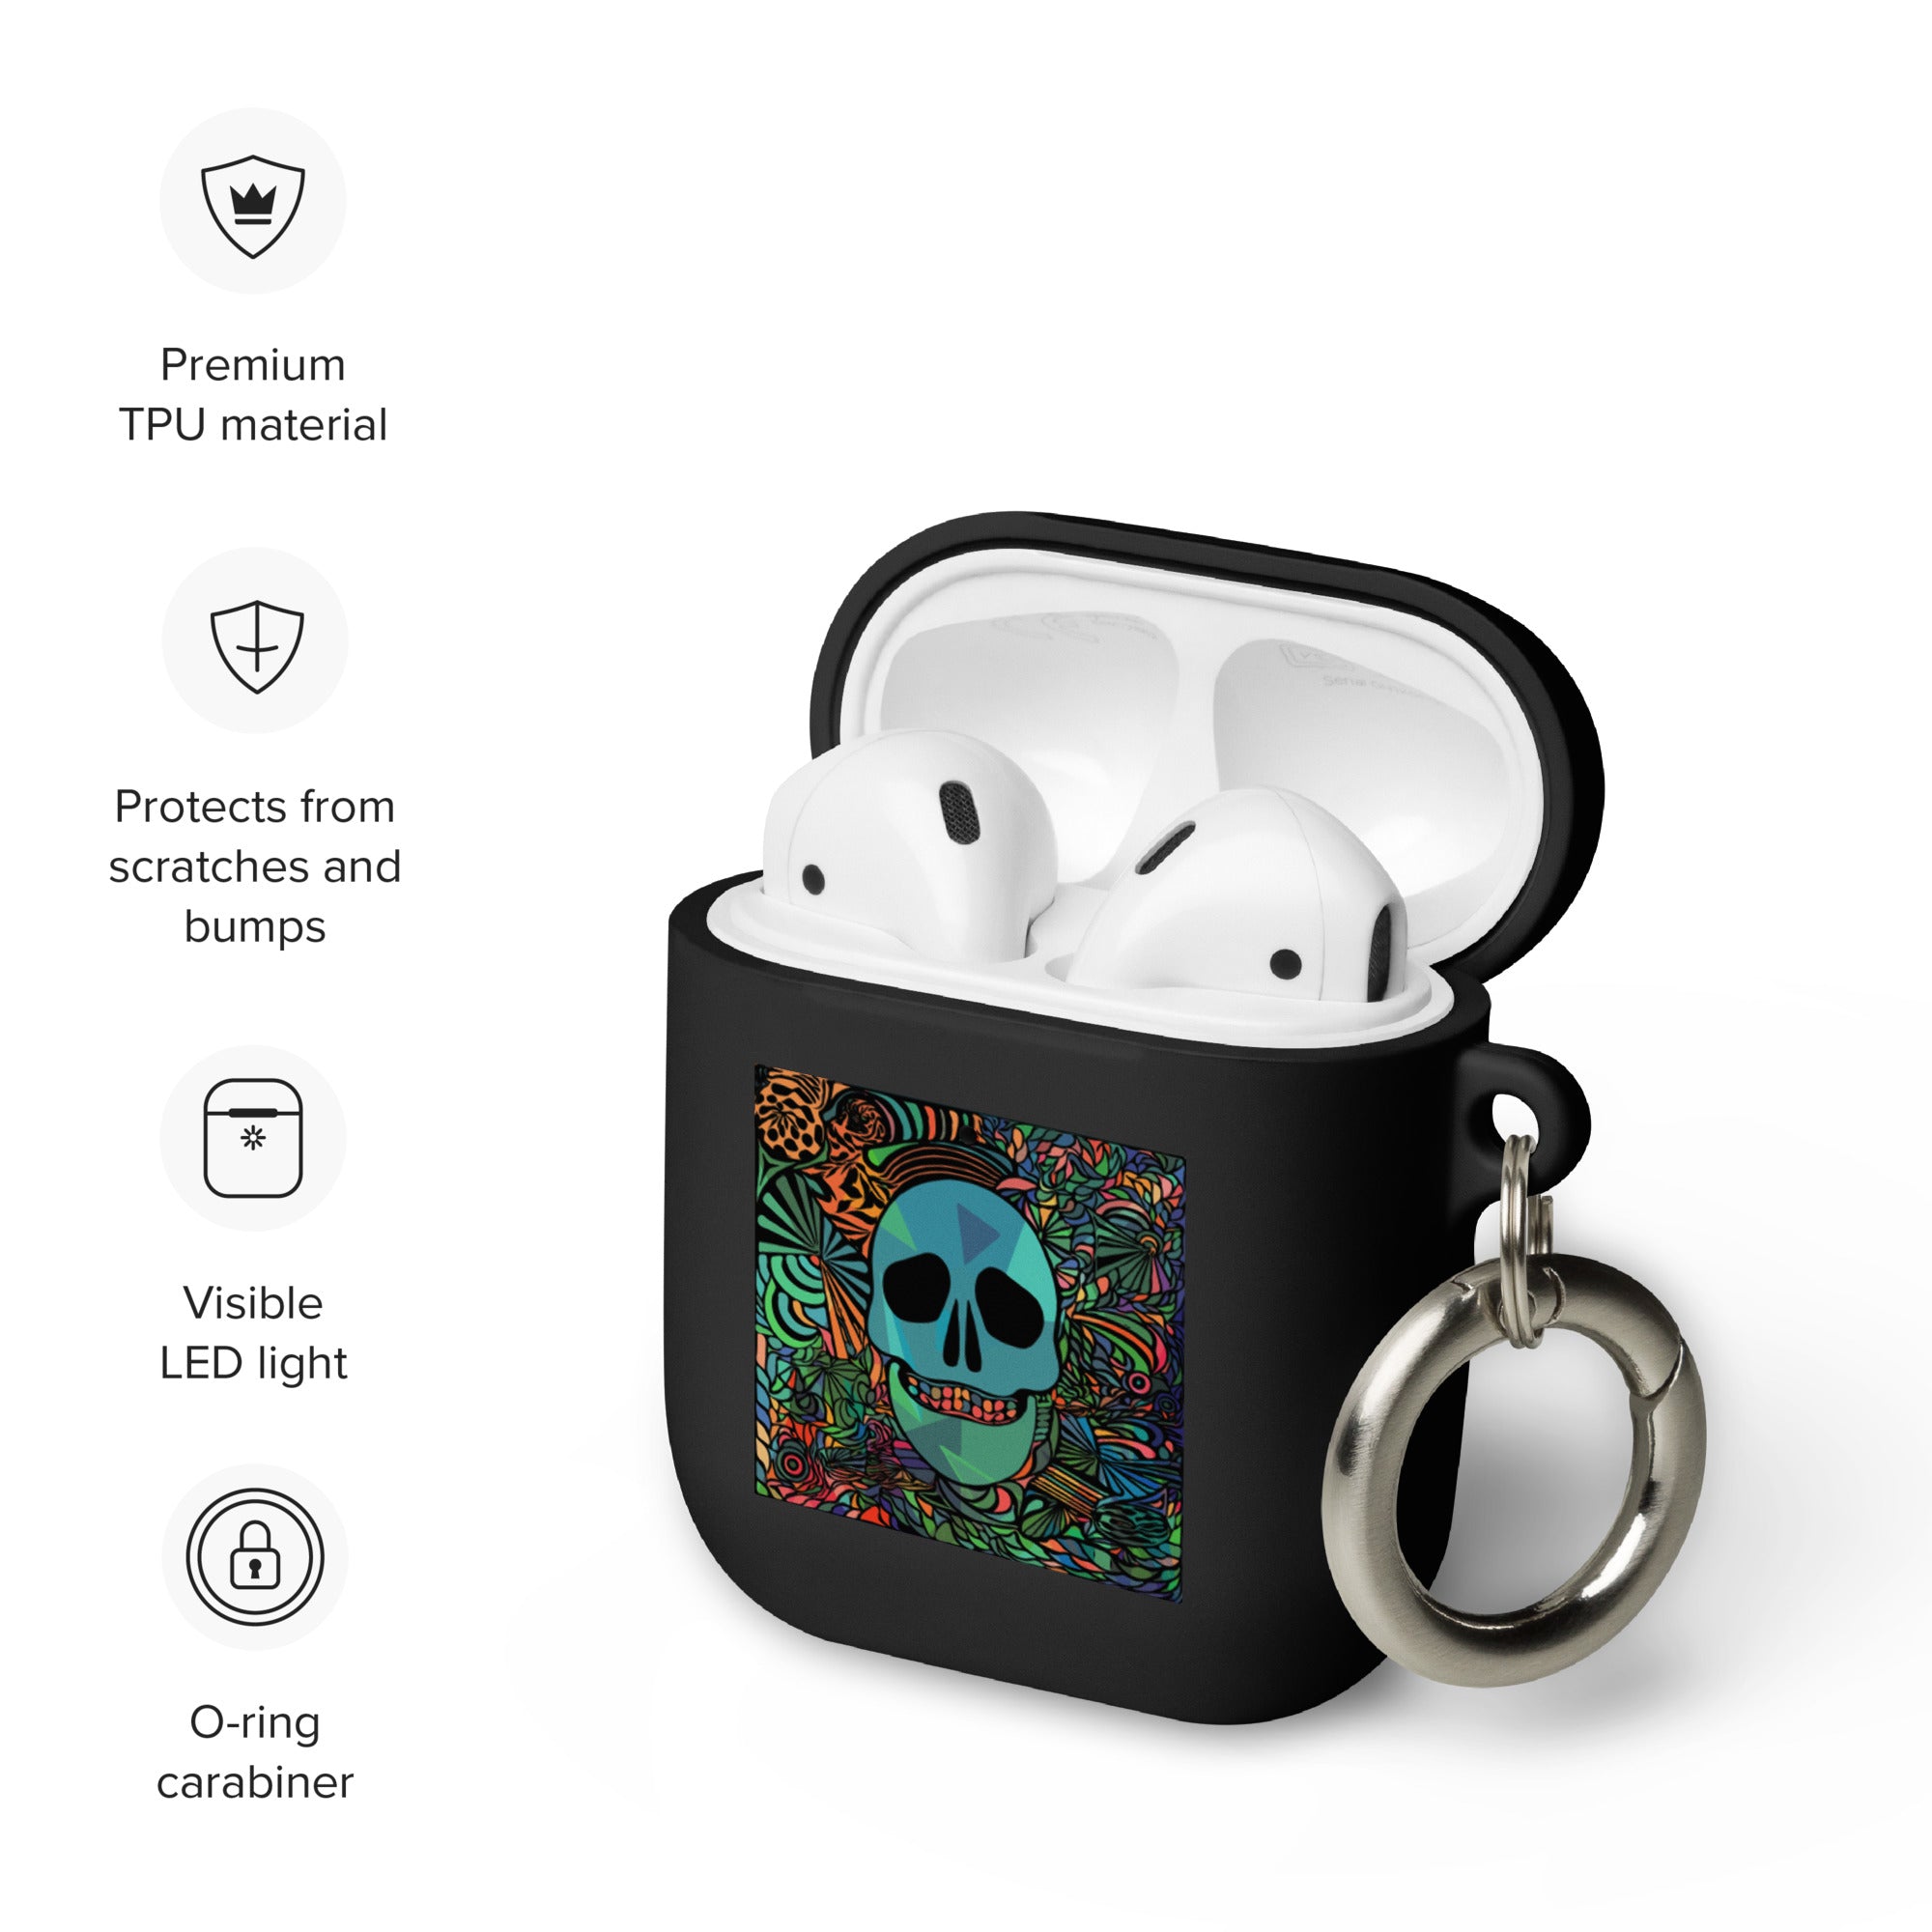 Psychedelic Skull  - Fun image to make you smile - AirPods case